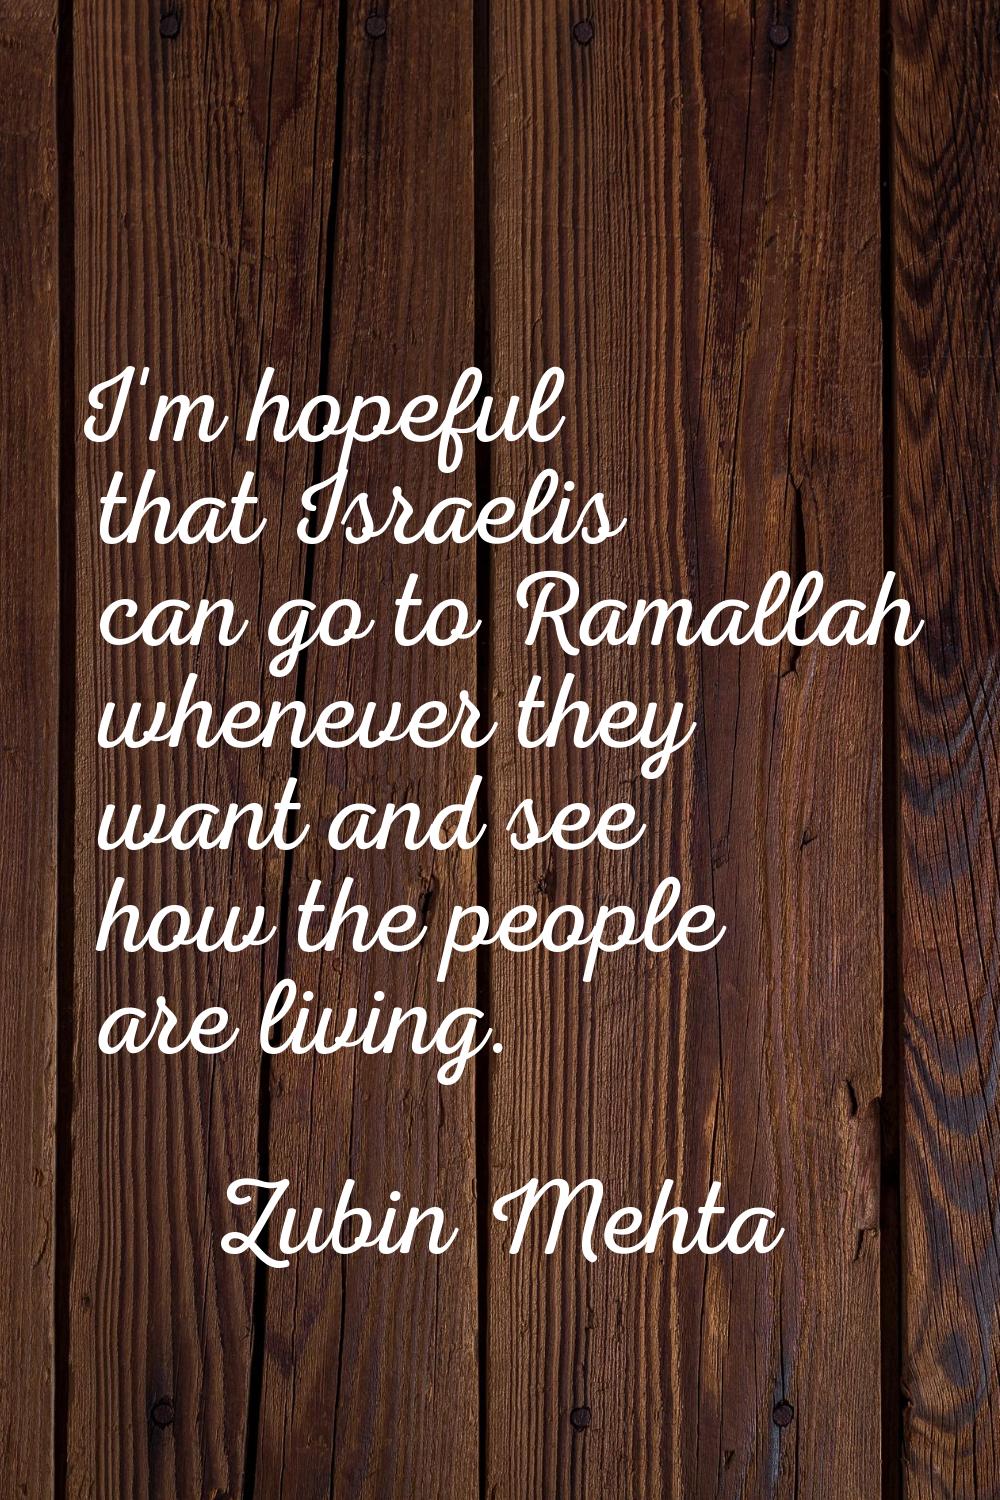 I'm hopeful that Israelis can go to Ramallah whenever they want and see how the people are living.